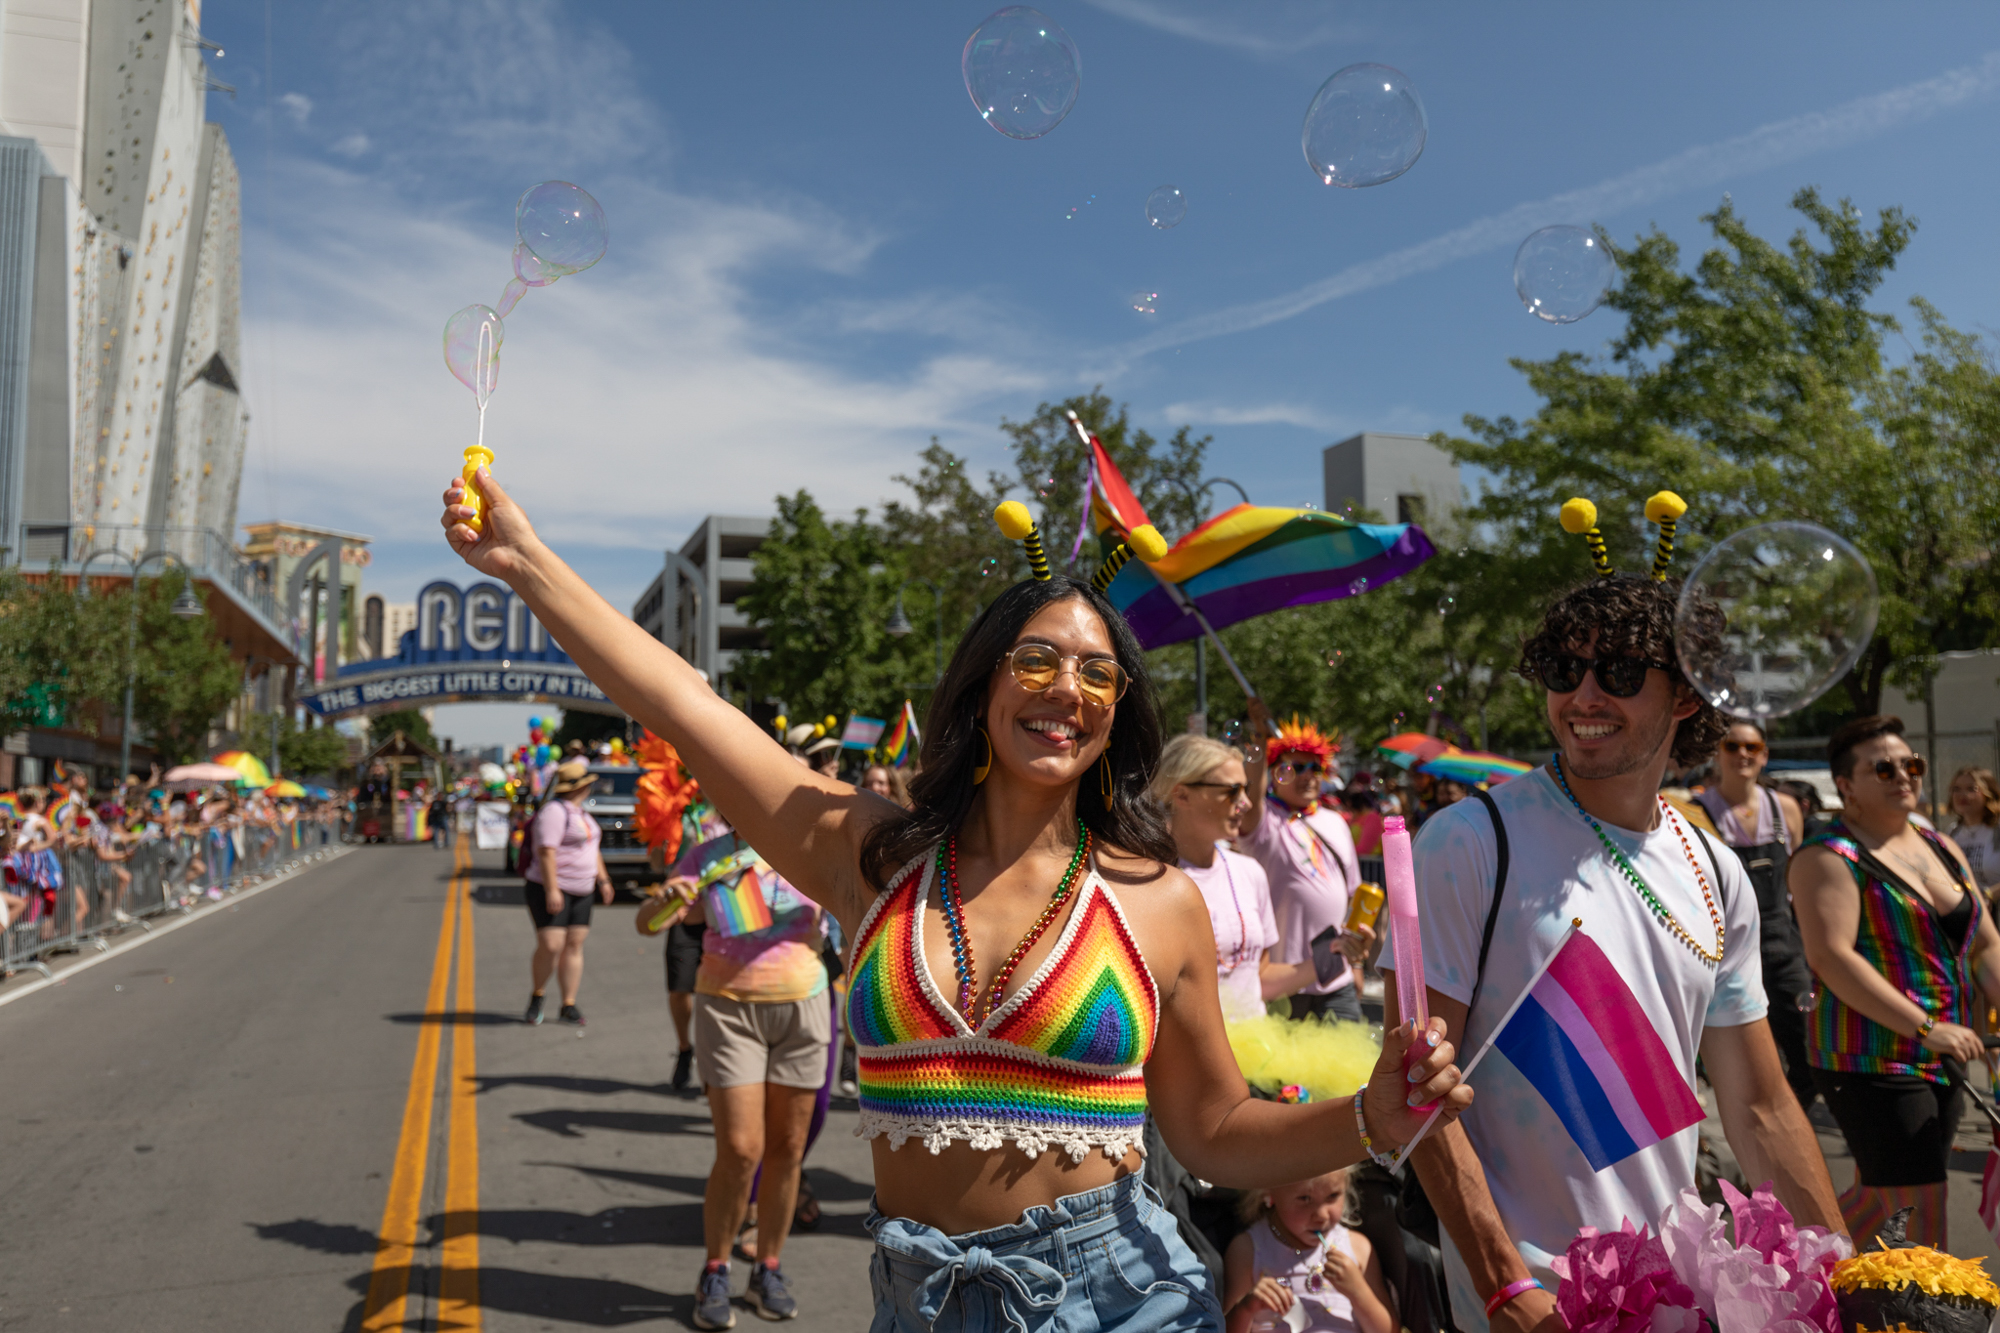 Leading Inclusion – How a Club Organized a Community's First Pride March